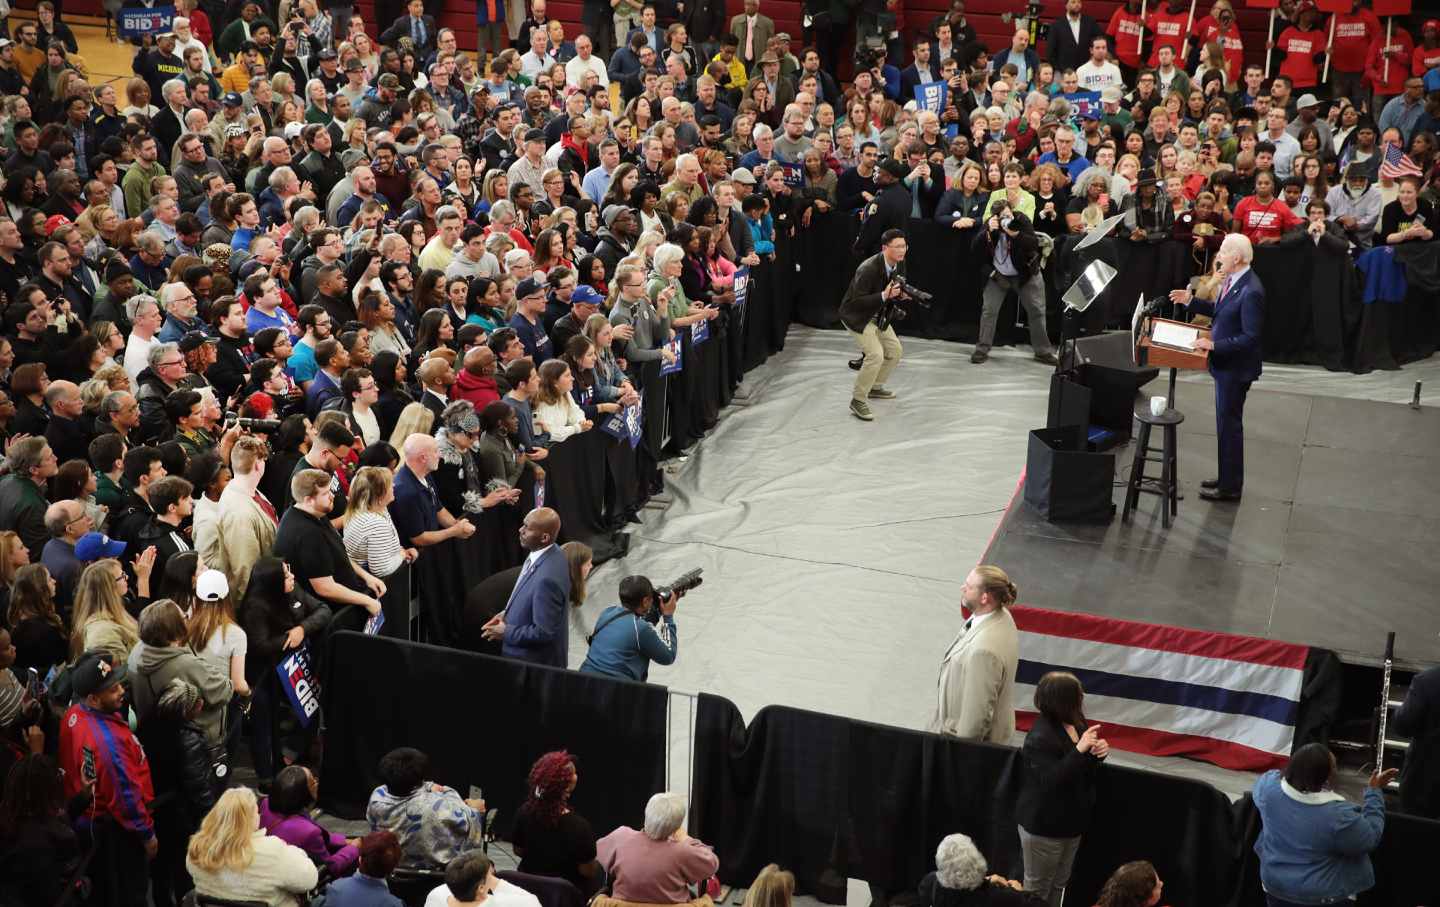 The crowd at a rally for Joe Biden, then running for president, in Detroit, Michigan, in 2020.